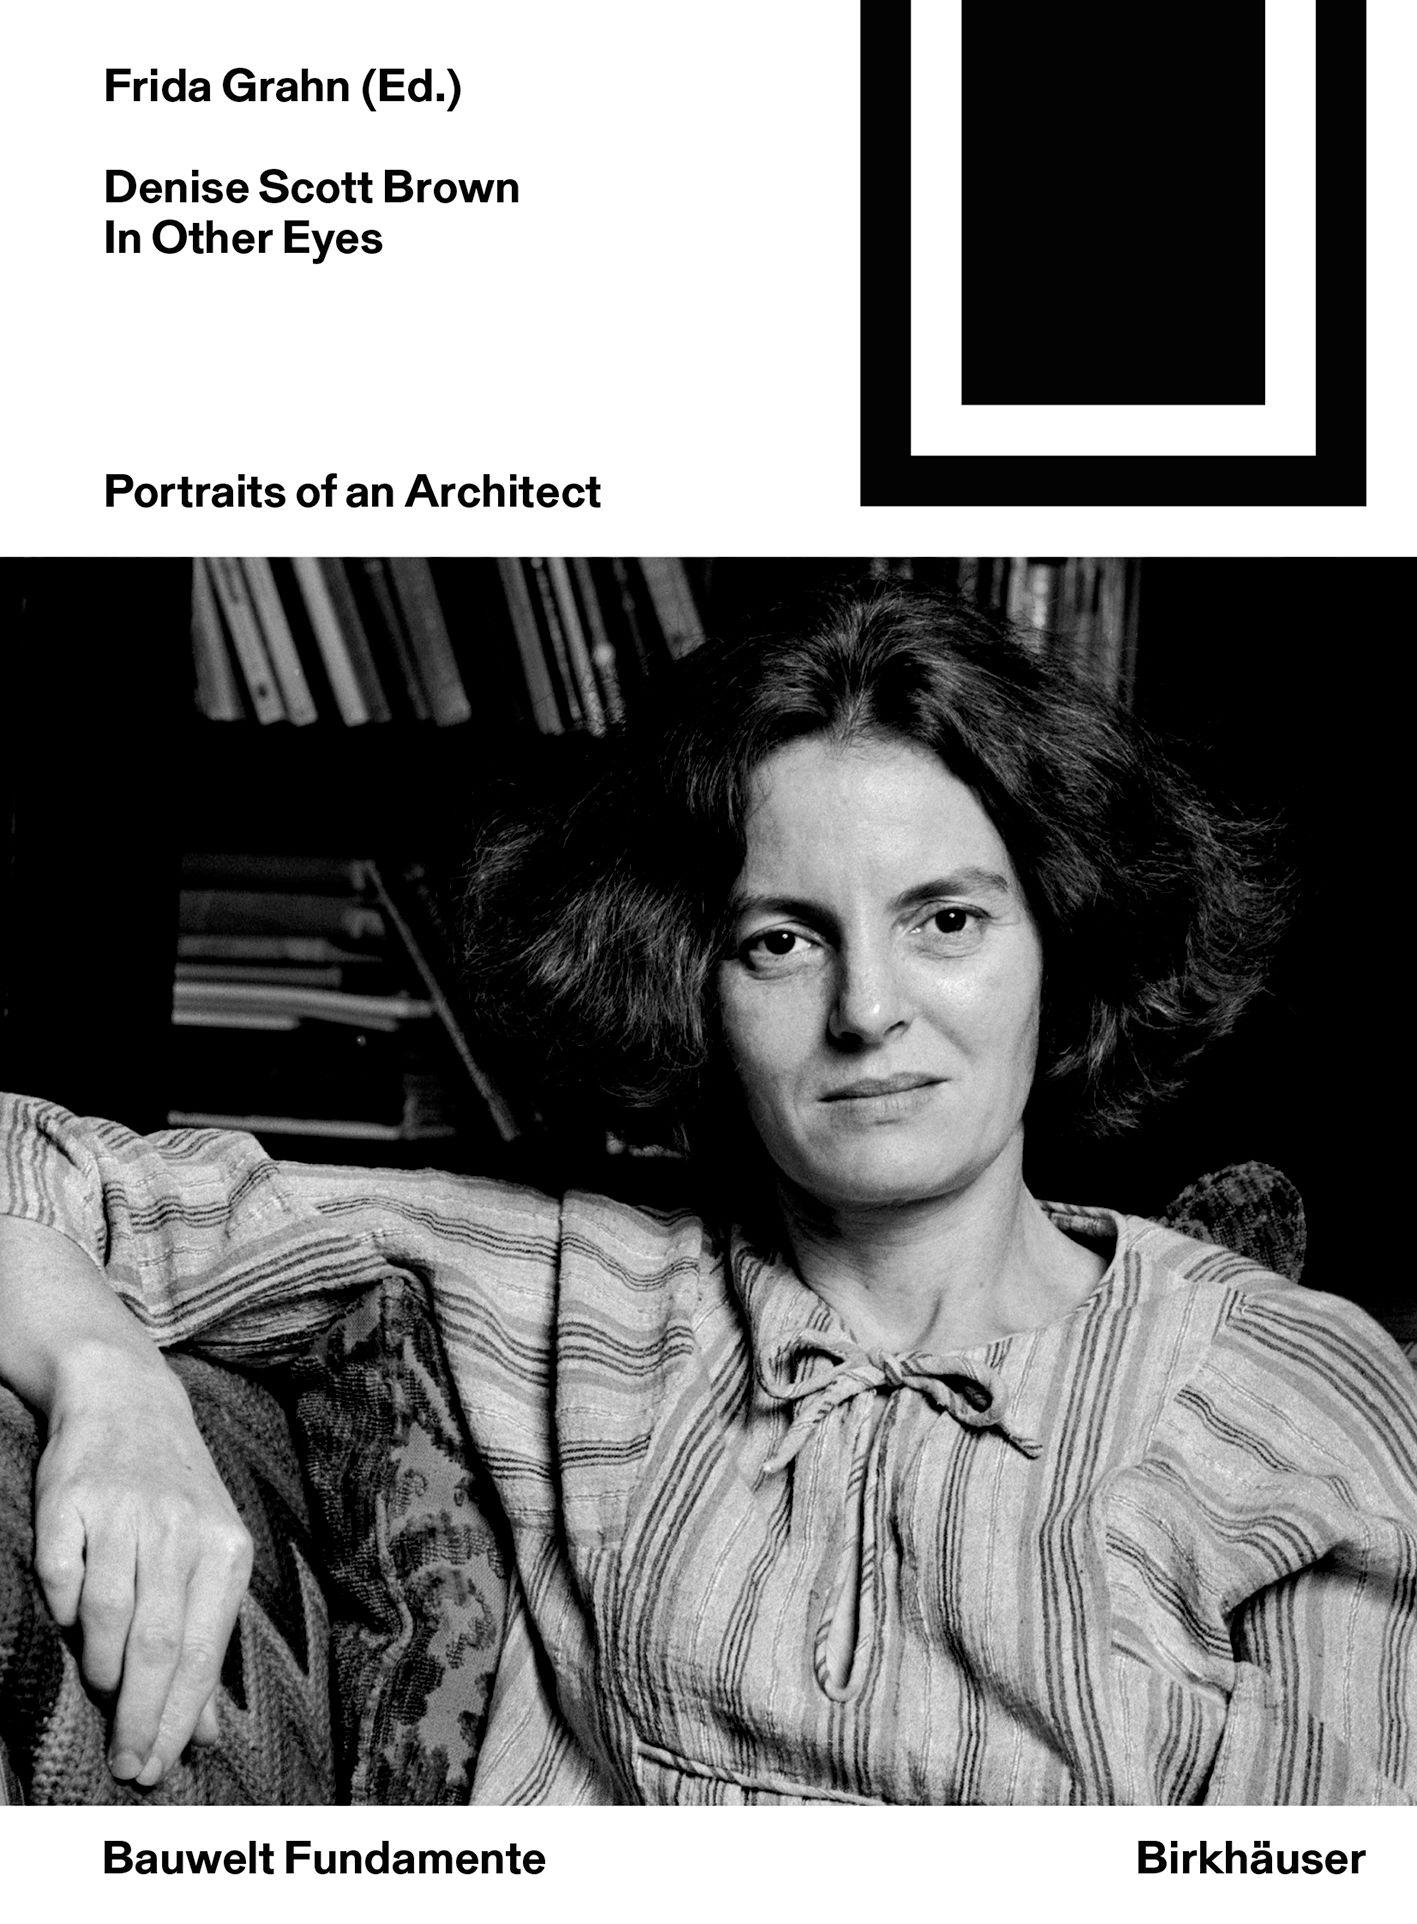 DENISE SCOTT BROWN IN OTHER EYES "PORTRAITS OF AN ARCHITECT"